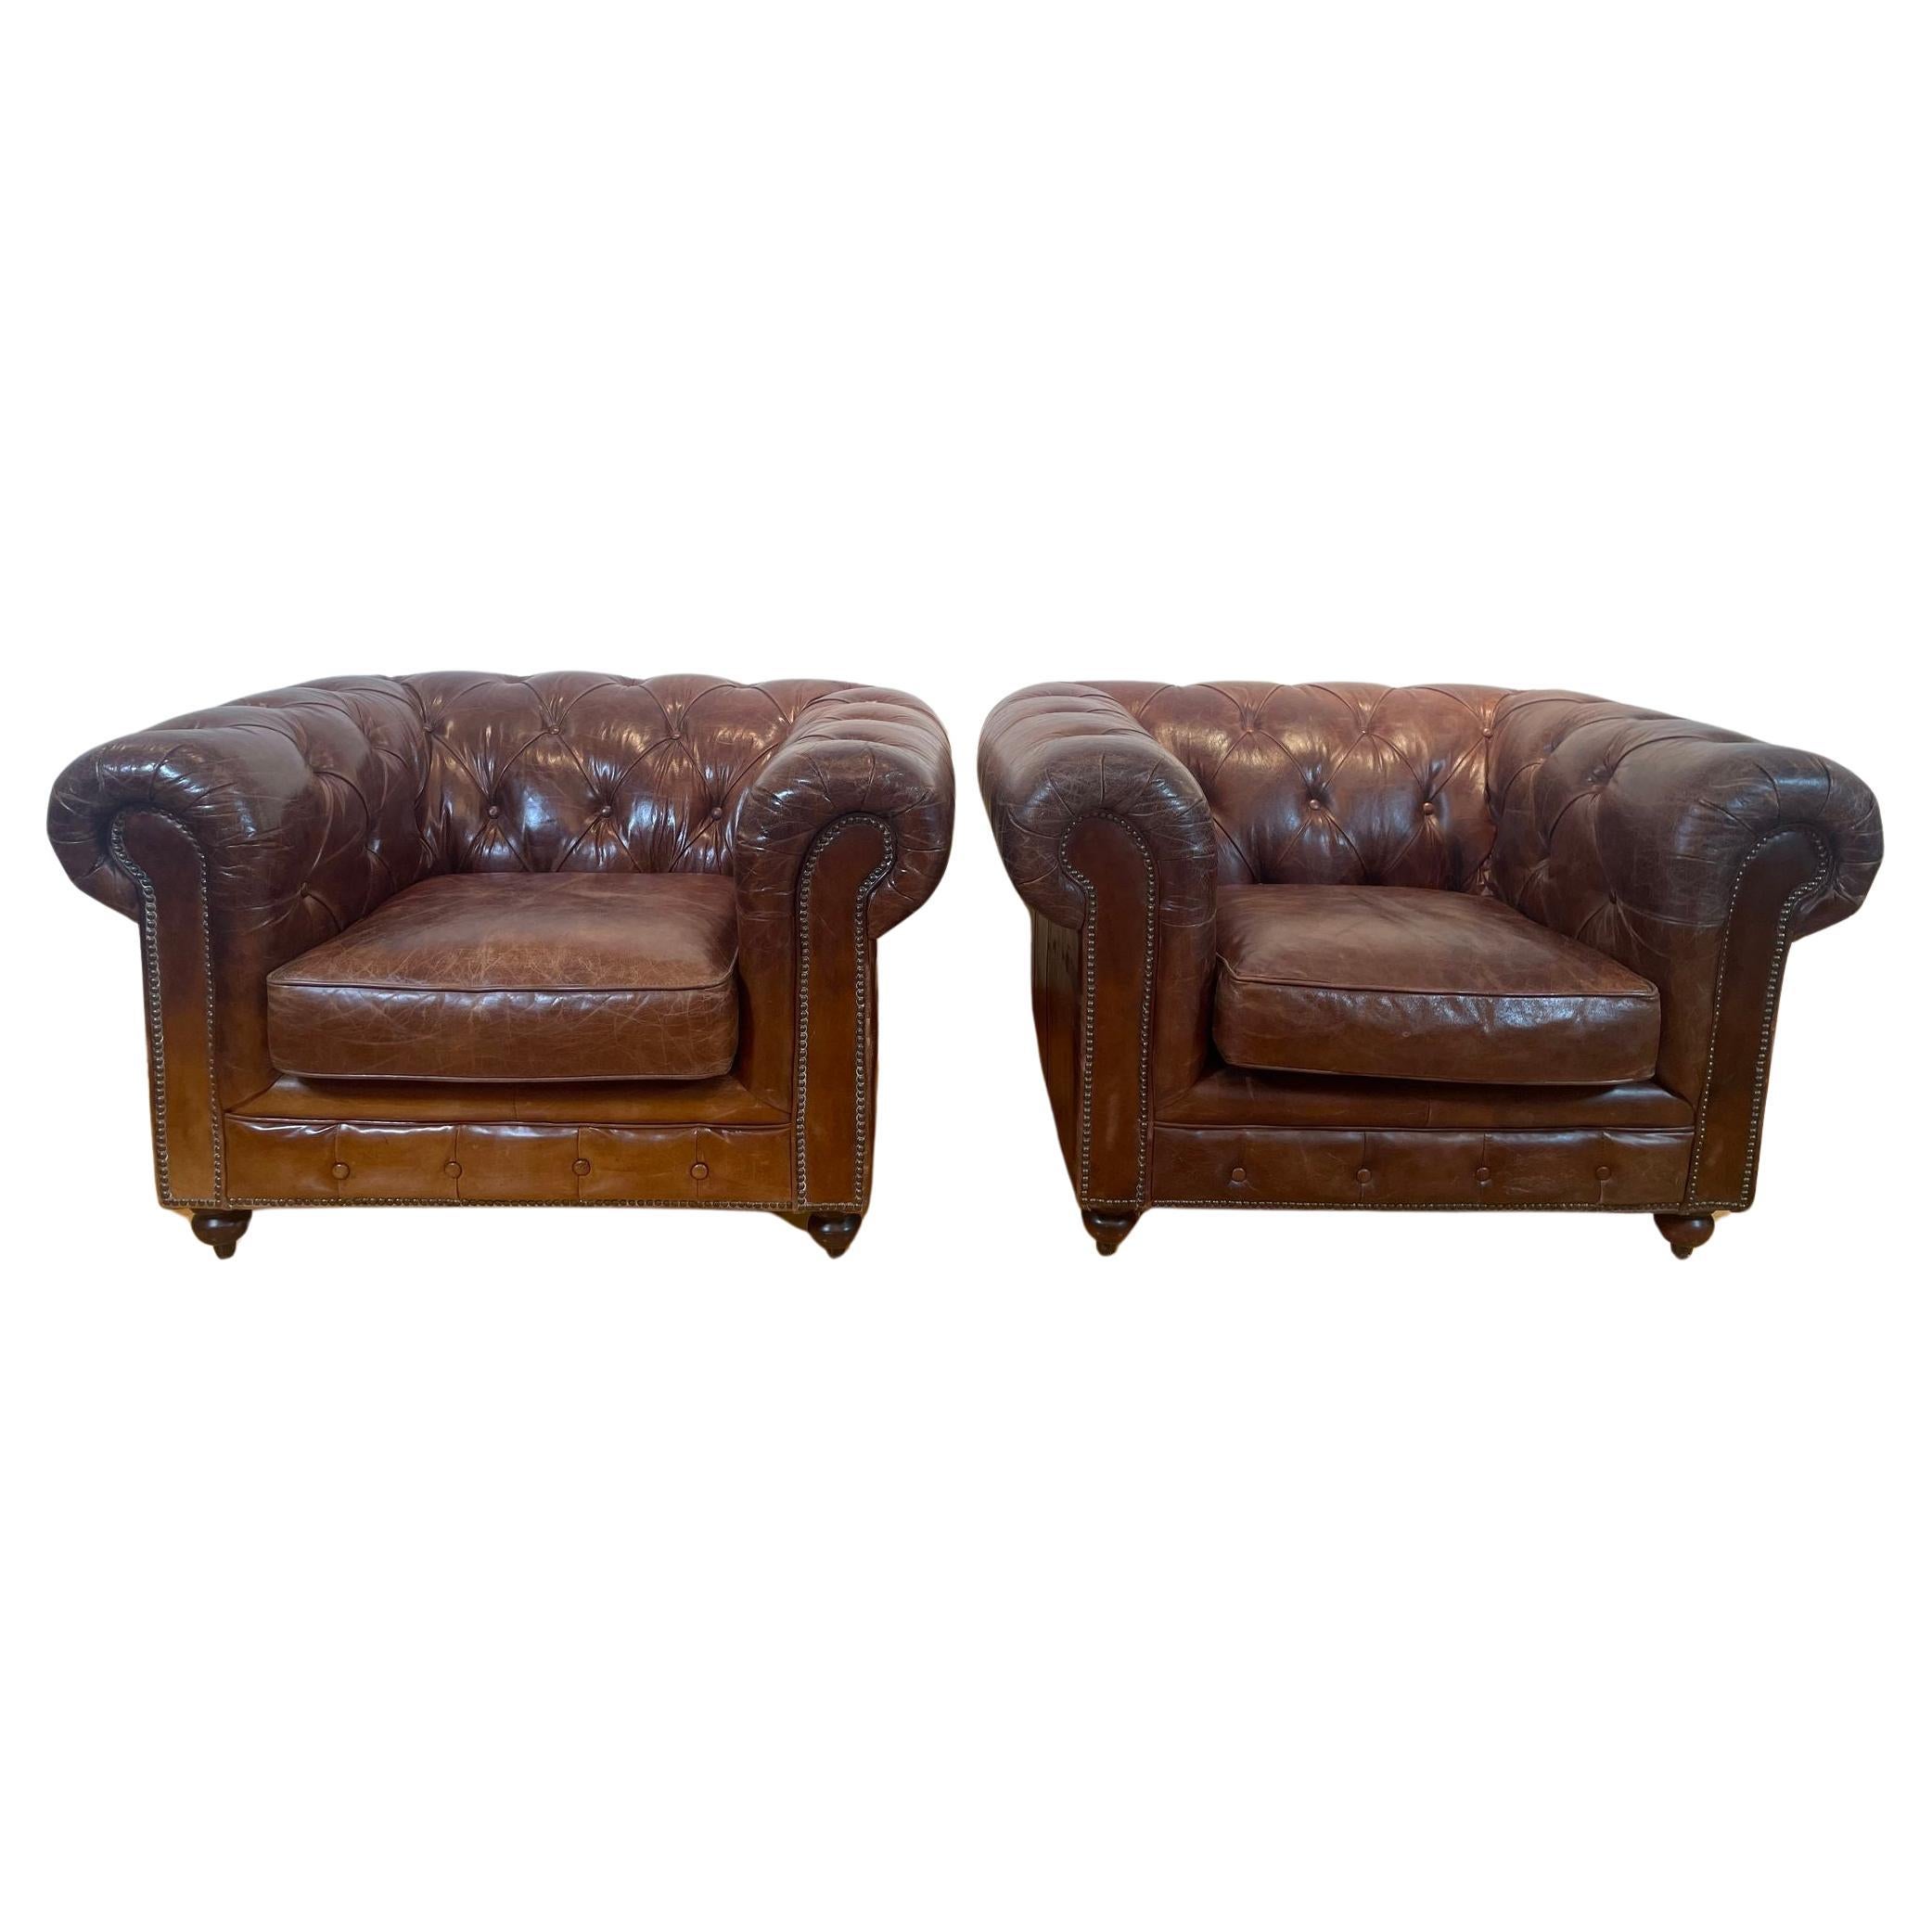 Vintage English Brown Leather Tufted Chesterfield Club Armchairs a Pair For Sale